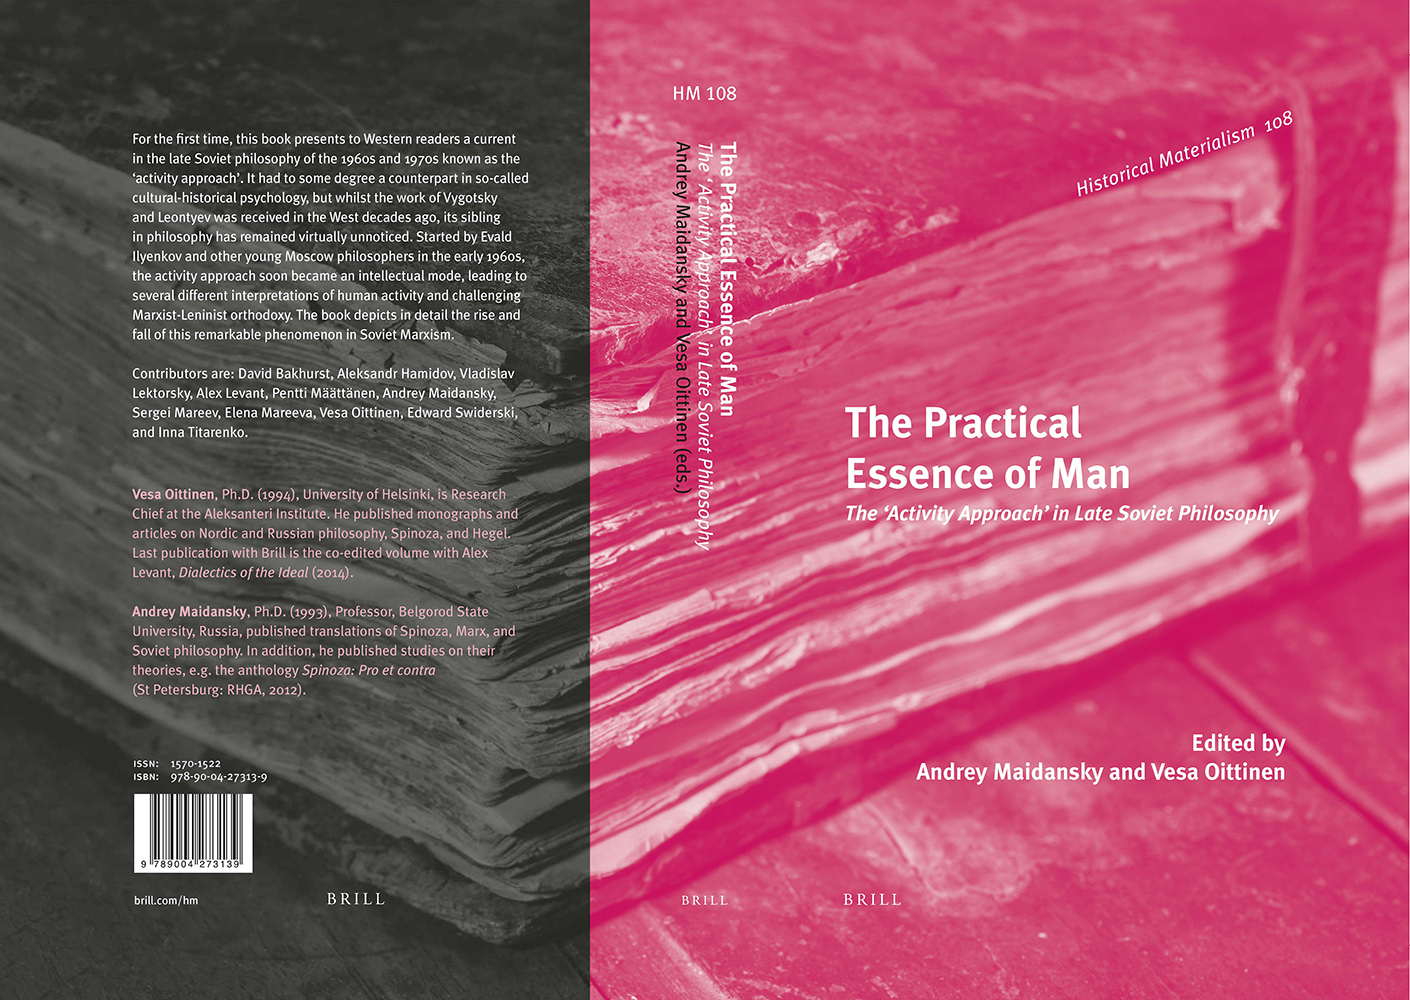 The Practical Essence of Man